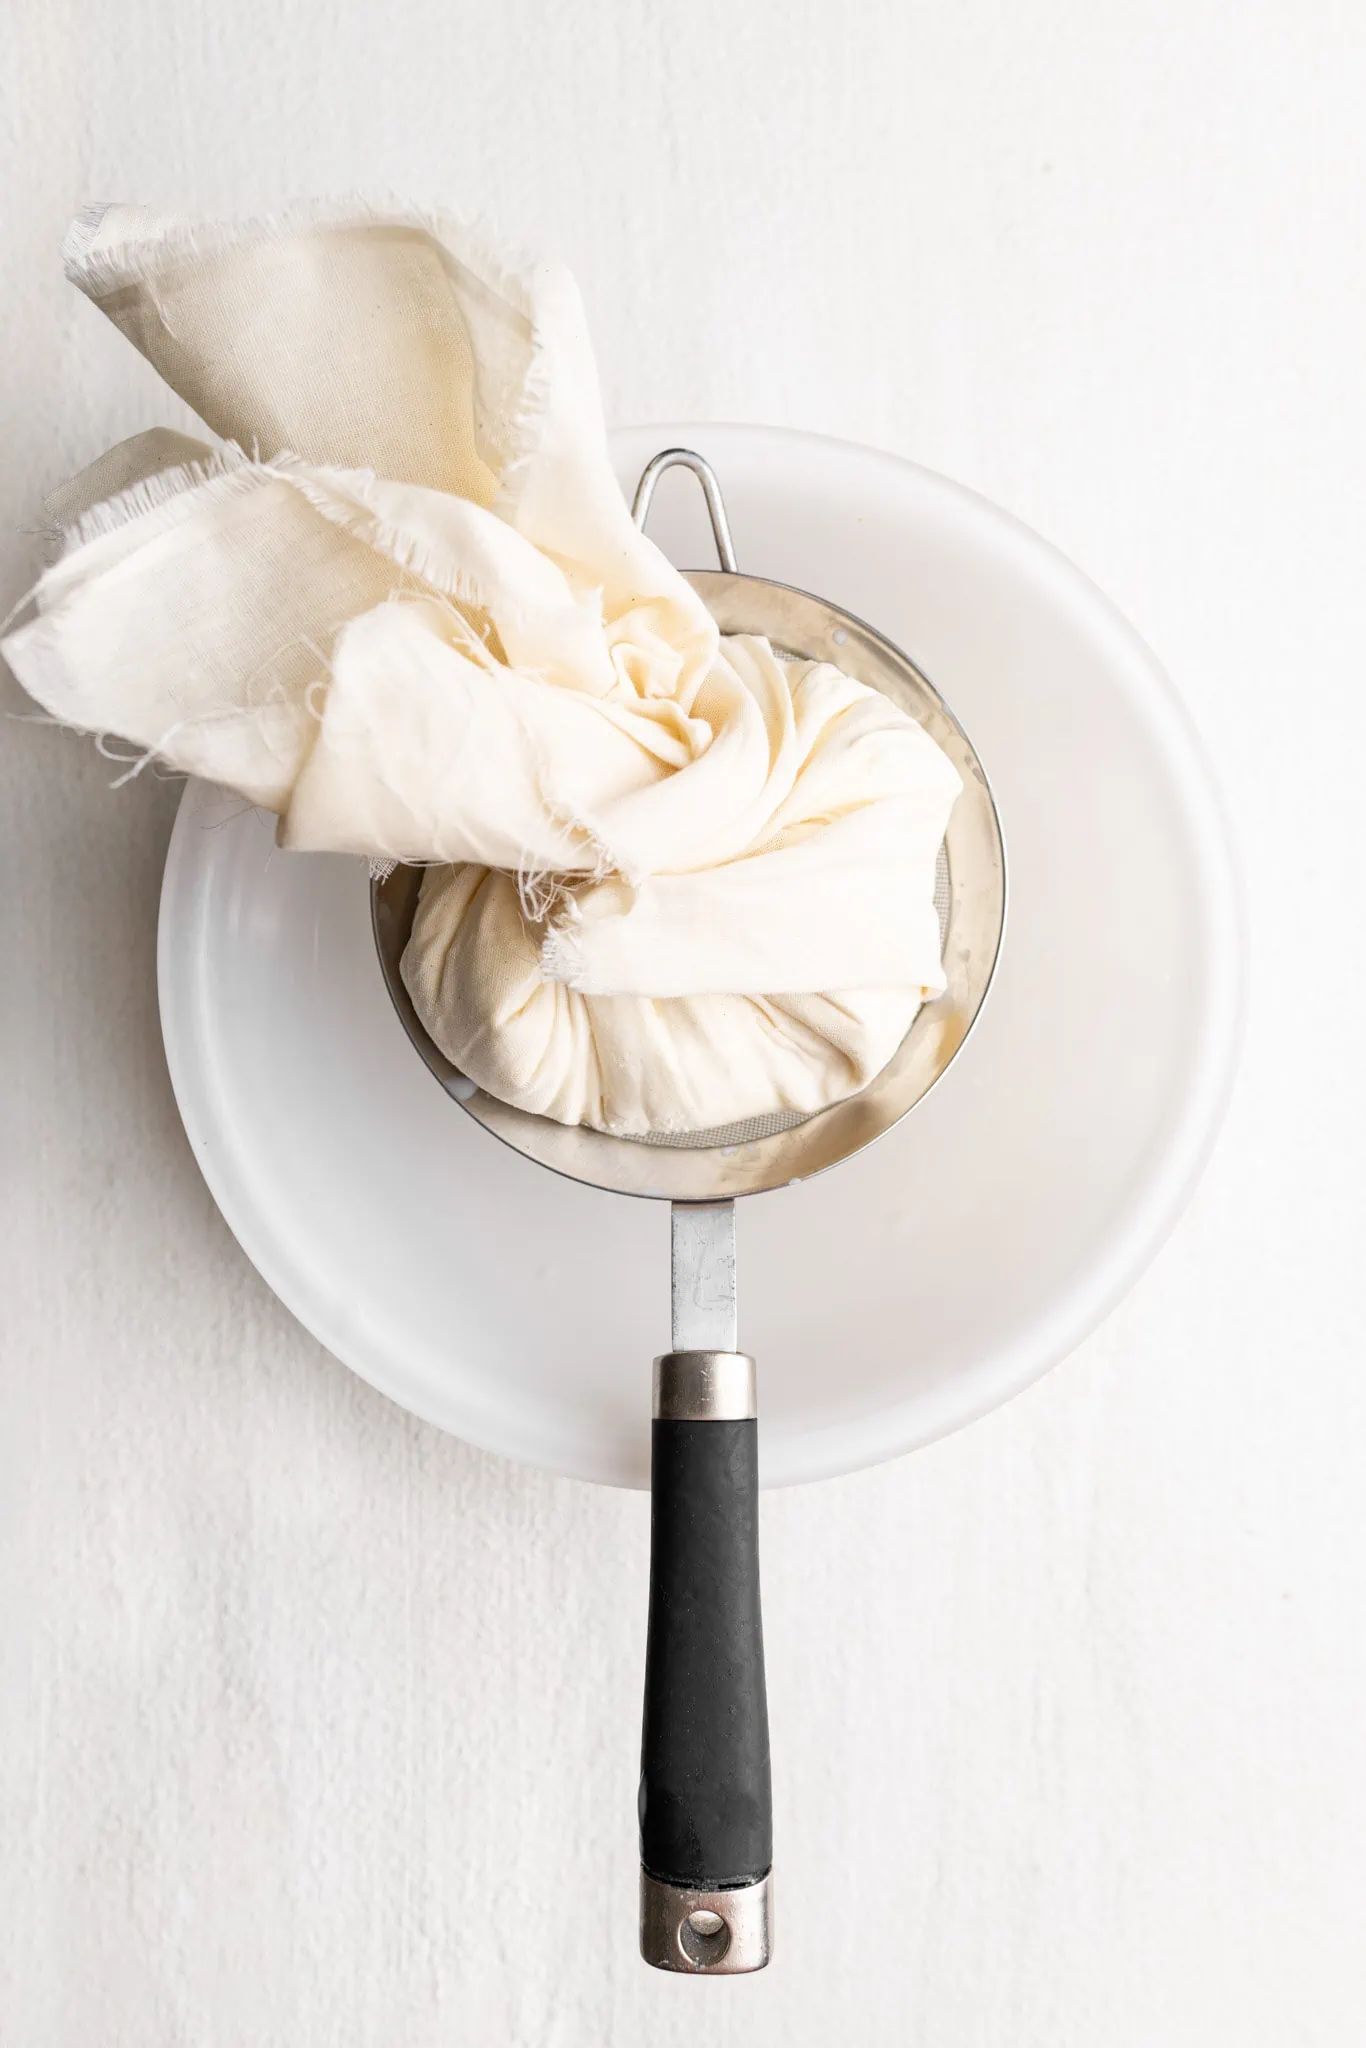 greek yogurt in a cheese cloth over a strainer, cheese cloth twisted.